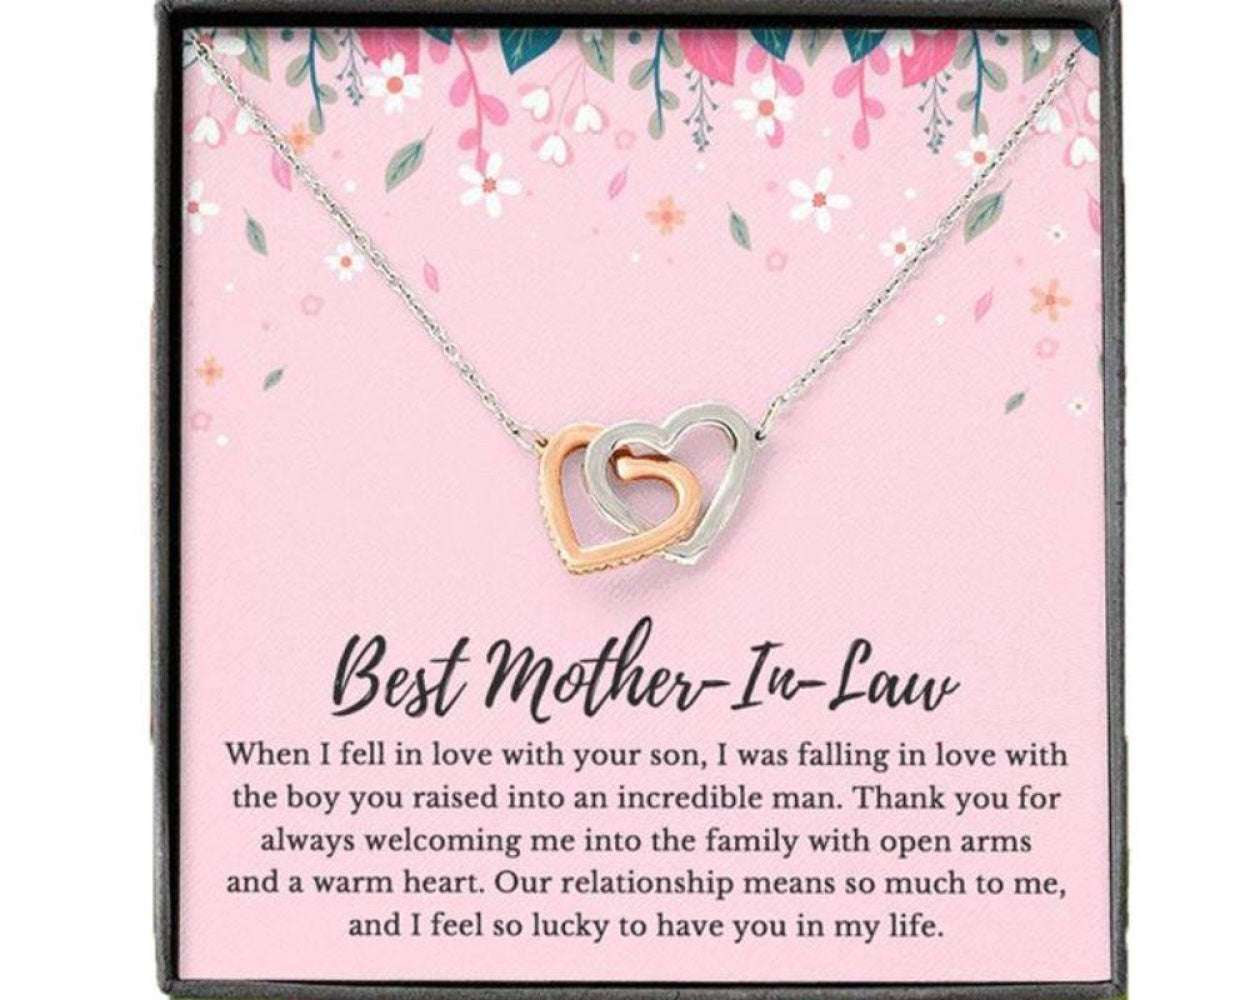 Mother-In-Law Necklace, To My Mother-In-Law Necklace, Mother Of The Groom Wedding Gift, Mothers Day Gifts for Mother (Mom) Rakva